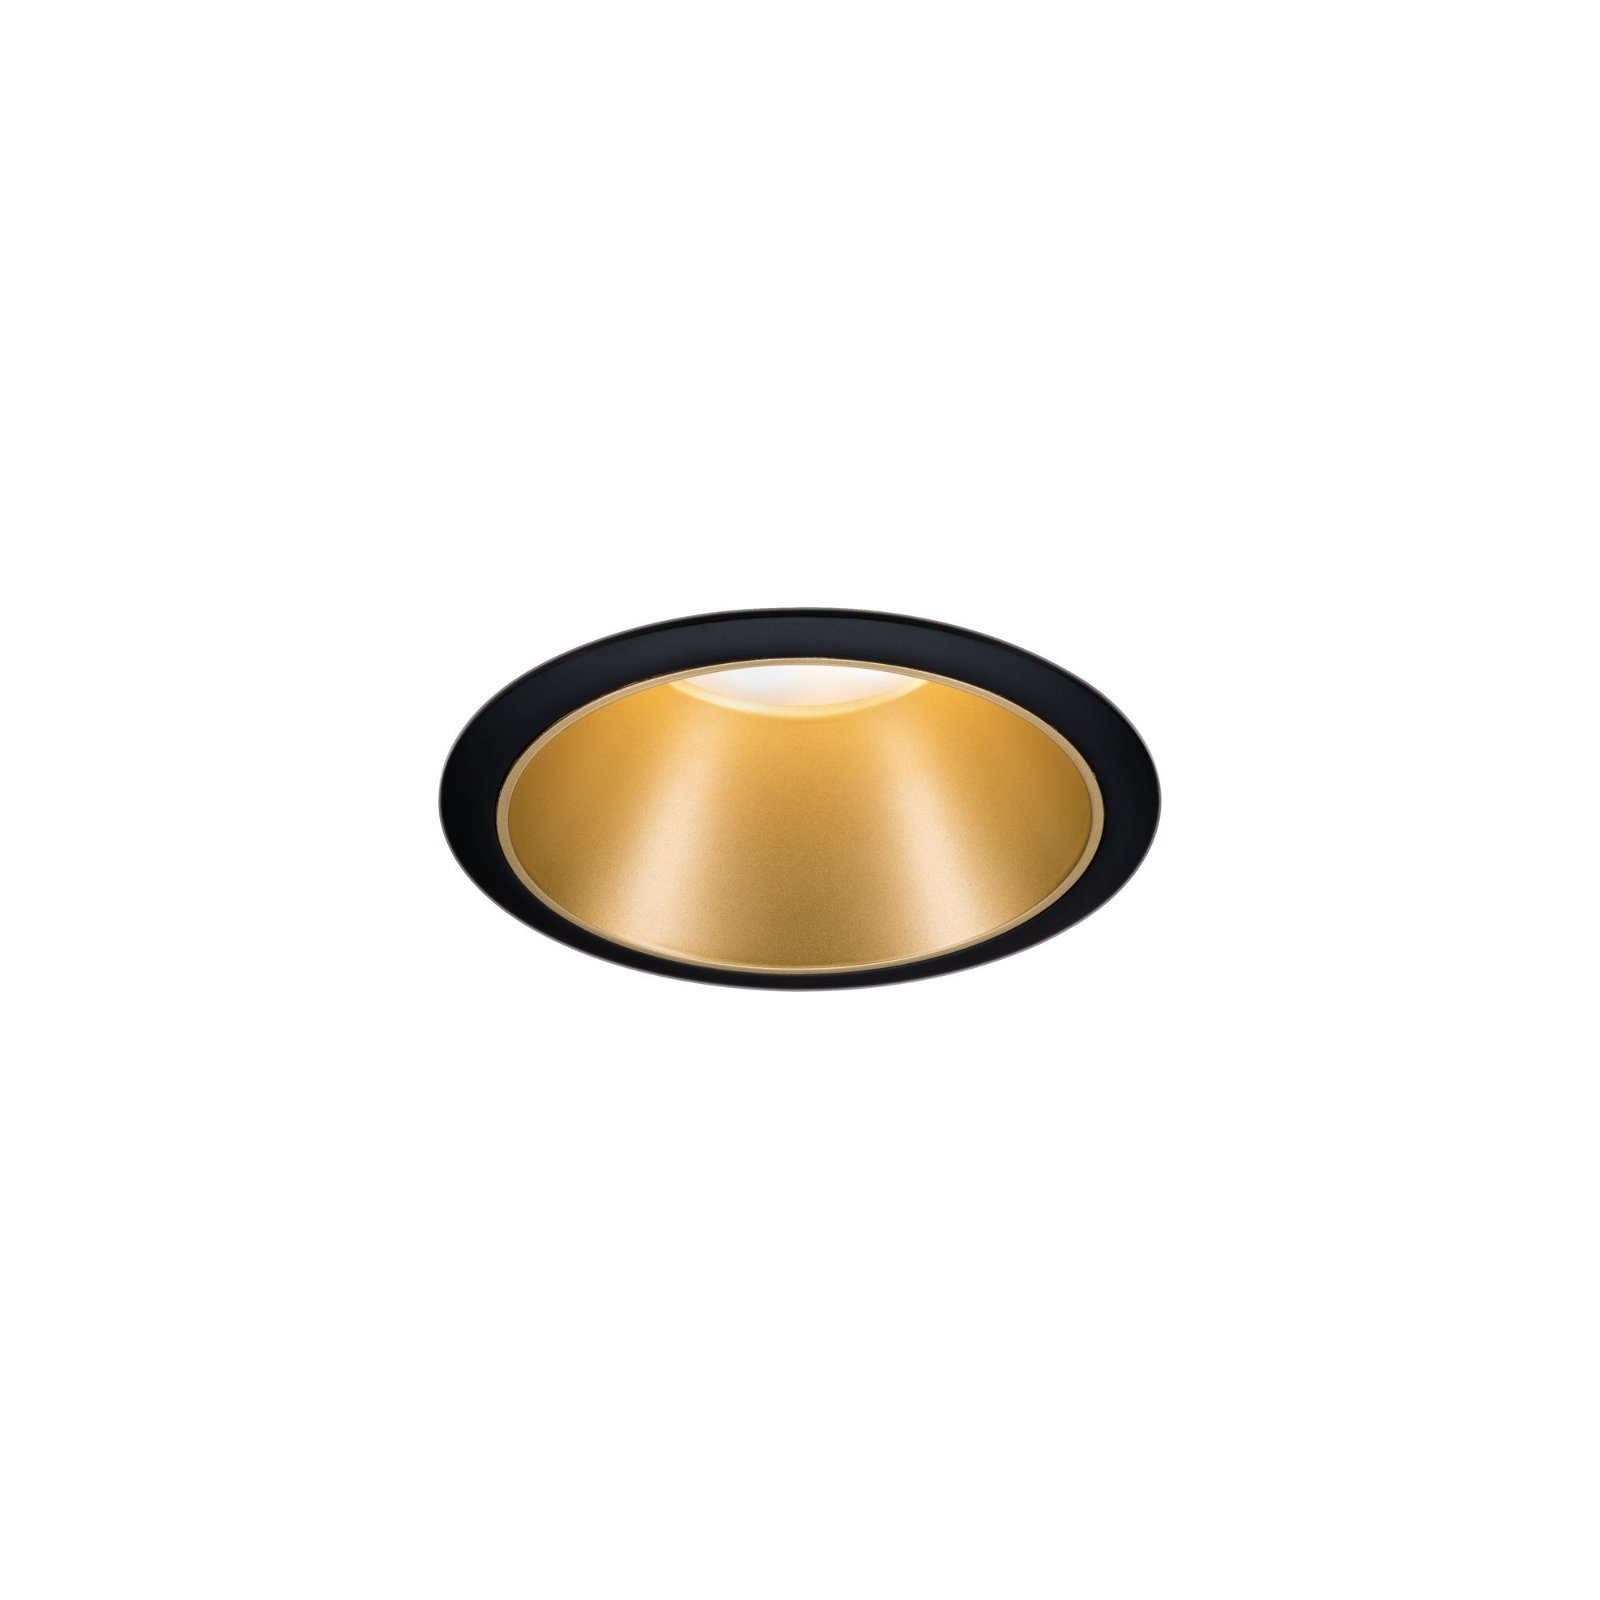 LED Recessed luminaire 3-Step-Dim Cole Coin Basic Set IP44 round 88mm Coin 3x6W 3x470lm 230V dimmable 2700K Black/Gold matt